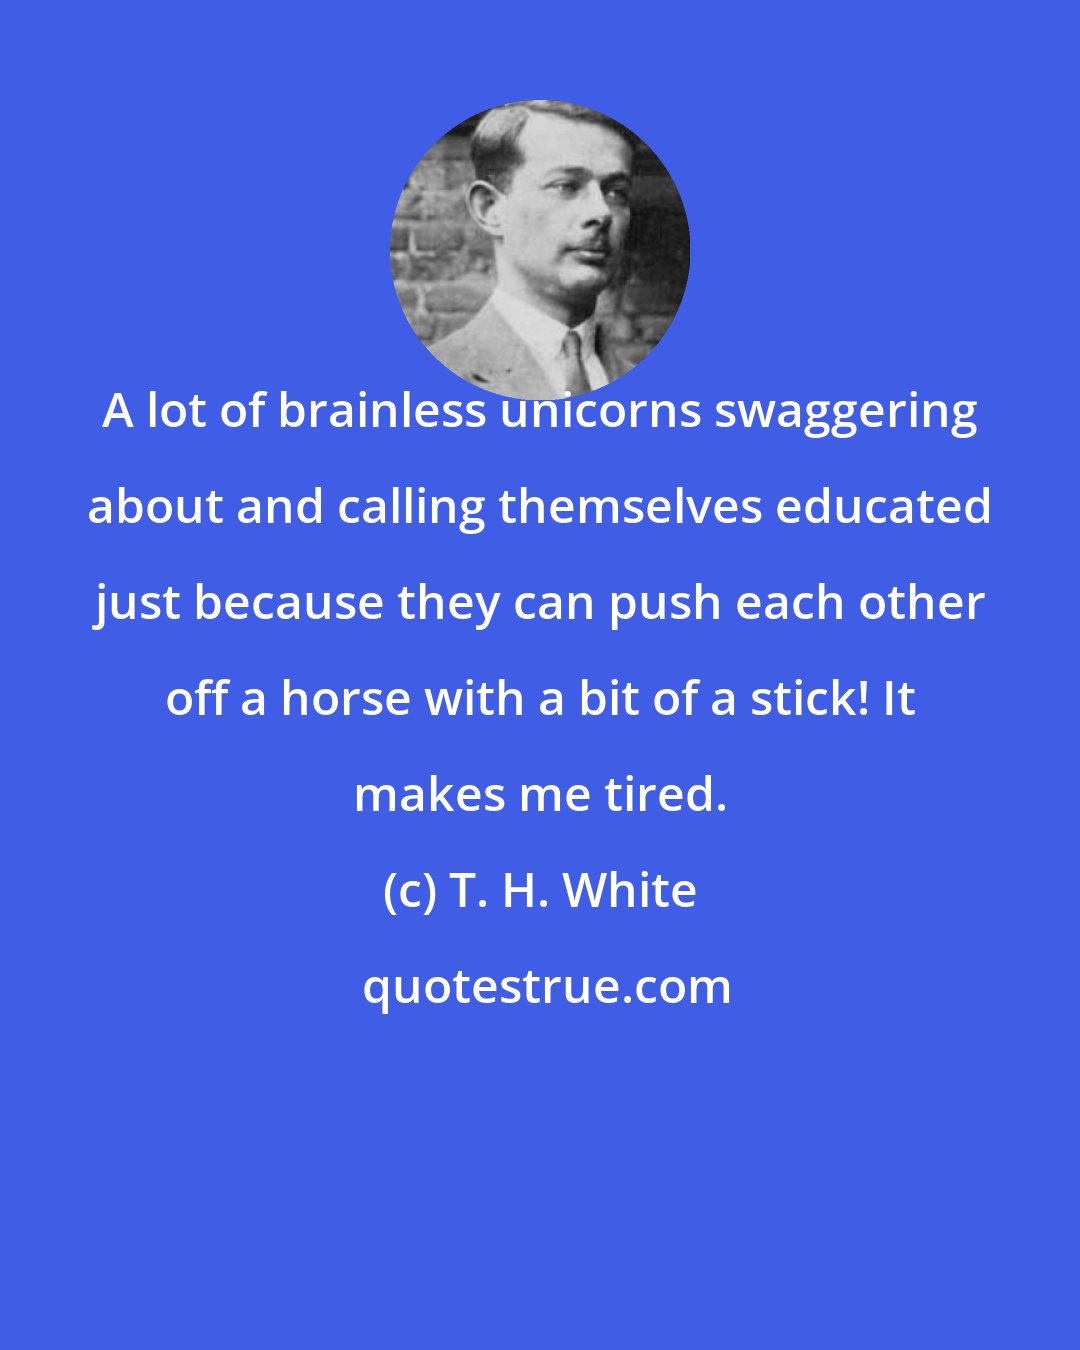 T. H. White: A lot of brainless unicorns swaggering about and calling themselves educated just because they can push each other off a horse with a bit of a stick! It makes me tired.